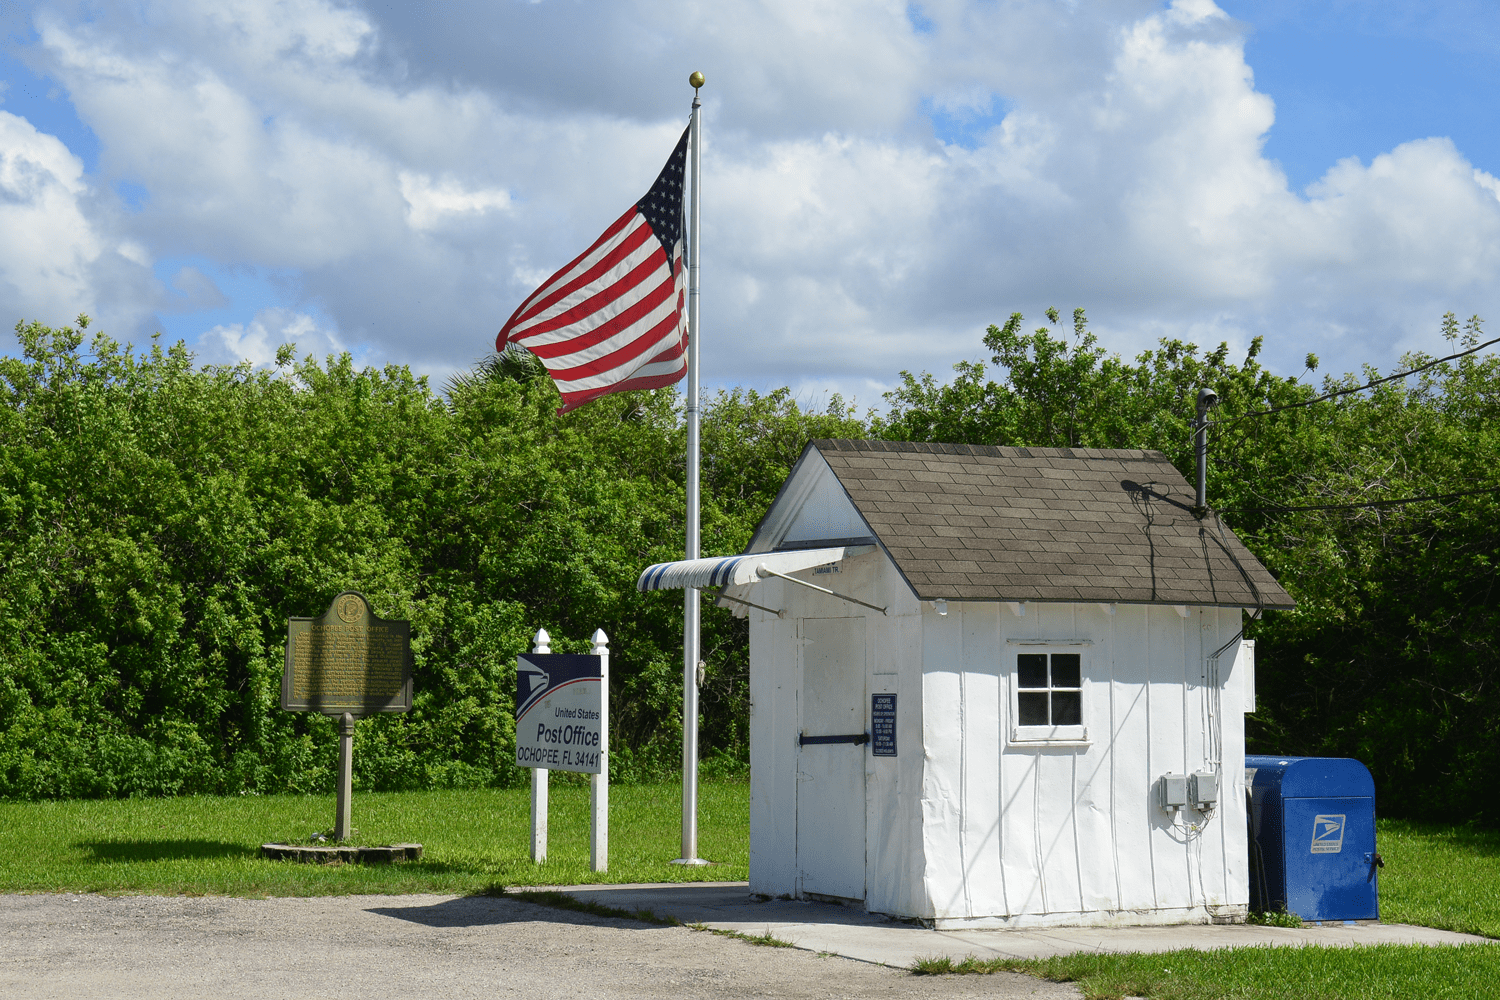 Where is the Smallest Post Office In The US? by Reverend Dr Bob N. Wallace, Everglades Community Church